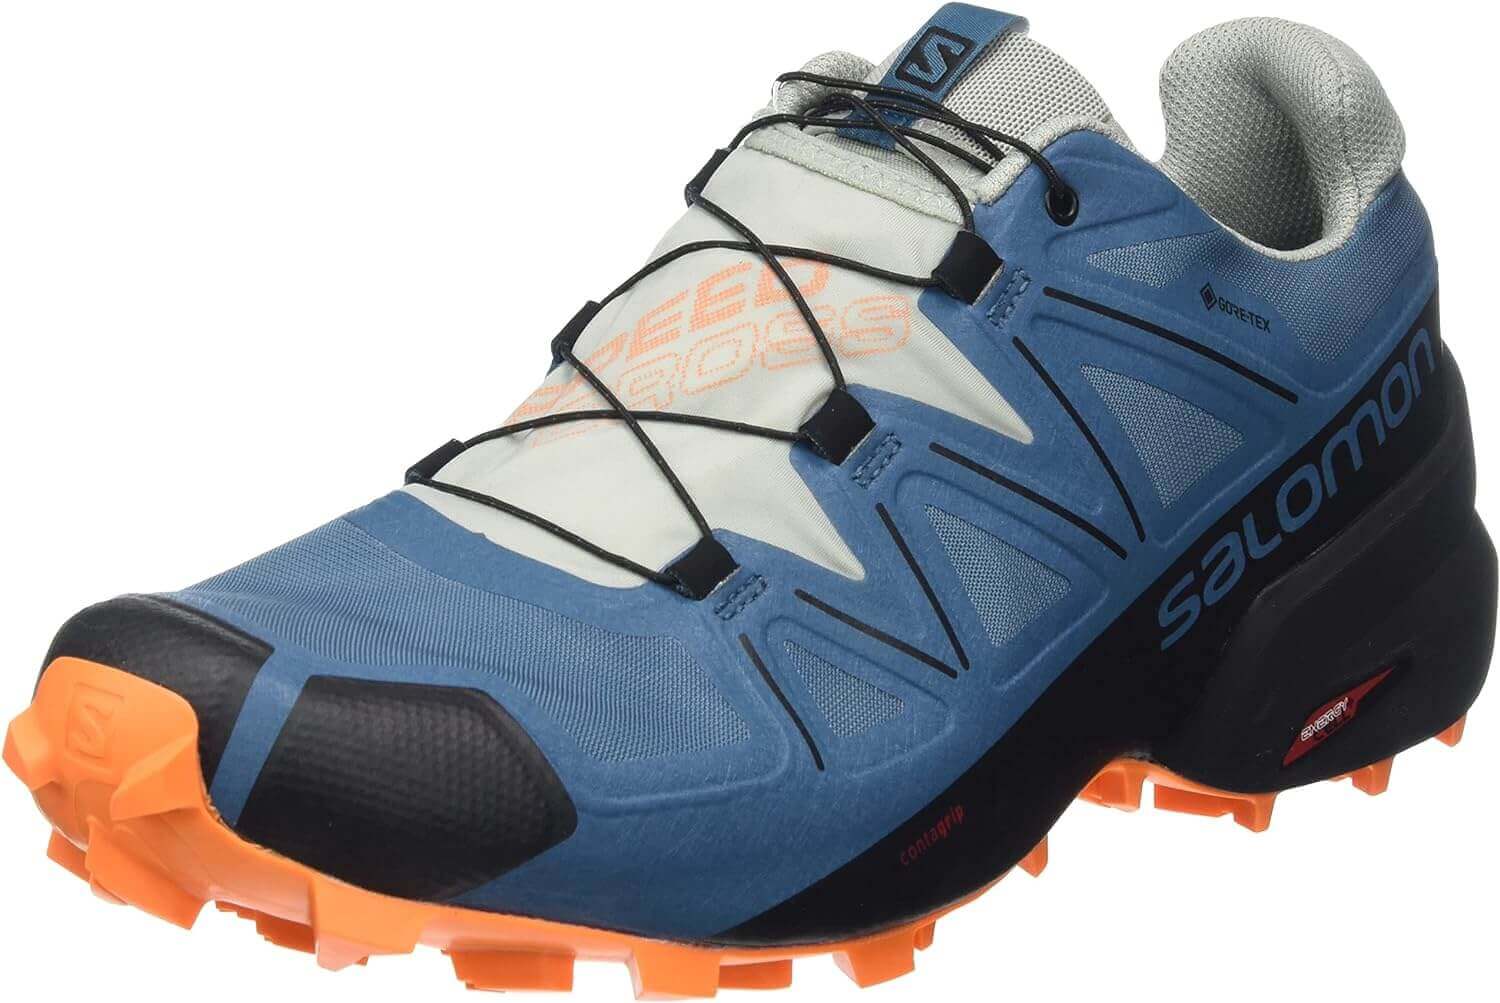 Shop The Latest >Salomon Men's Speedcross 5 GORE-TEX Trail Running Shoes > *Only $210.00*> From The Top Brand > *Salomonl* > Shop Now and Get Free Shipping On Orders Over $45.00 >*Shop Earth Foot*